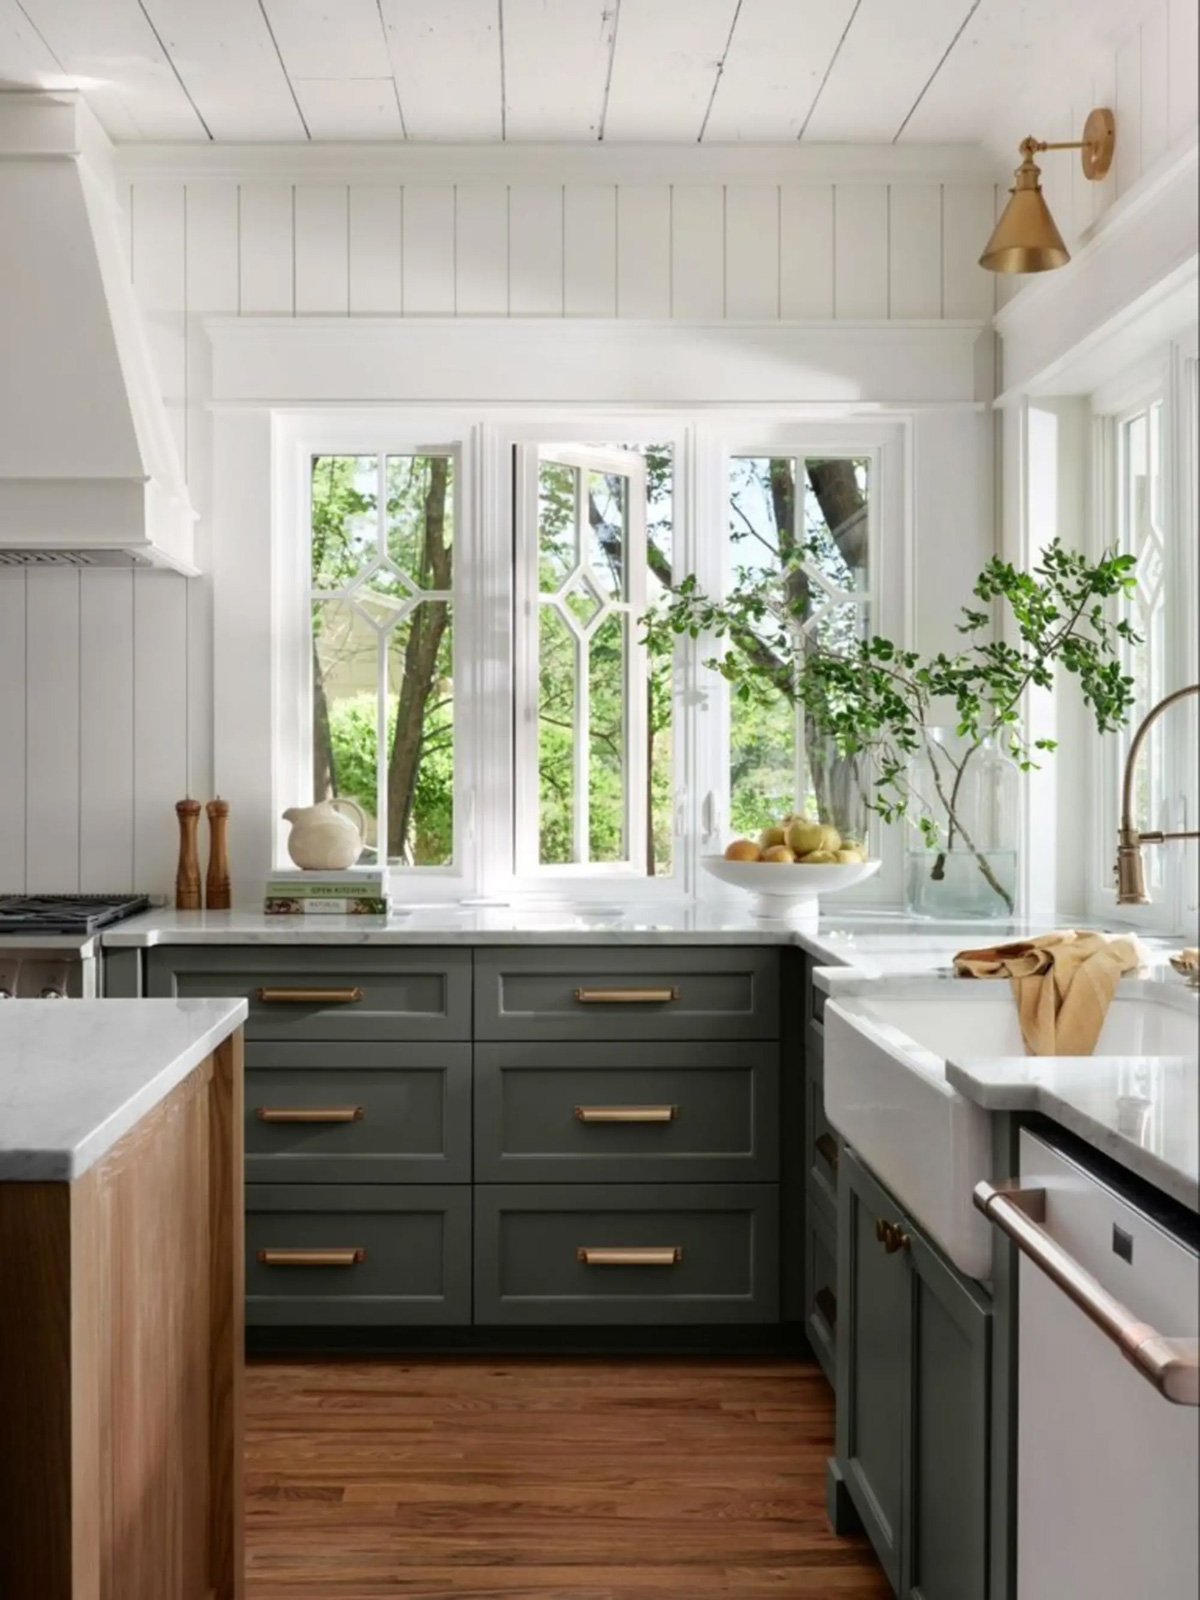 White kitchen walls with hunter green cabinets and bronze color handles.